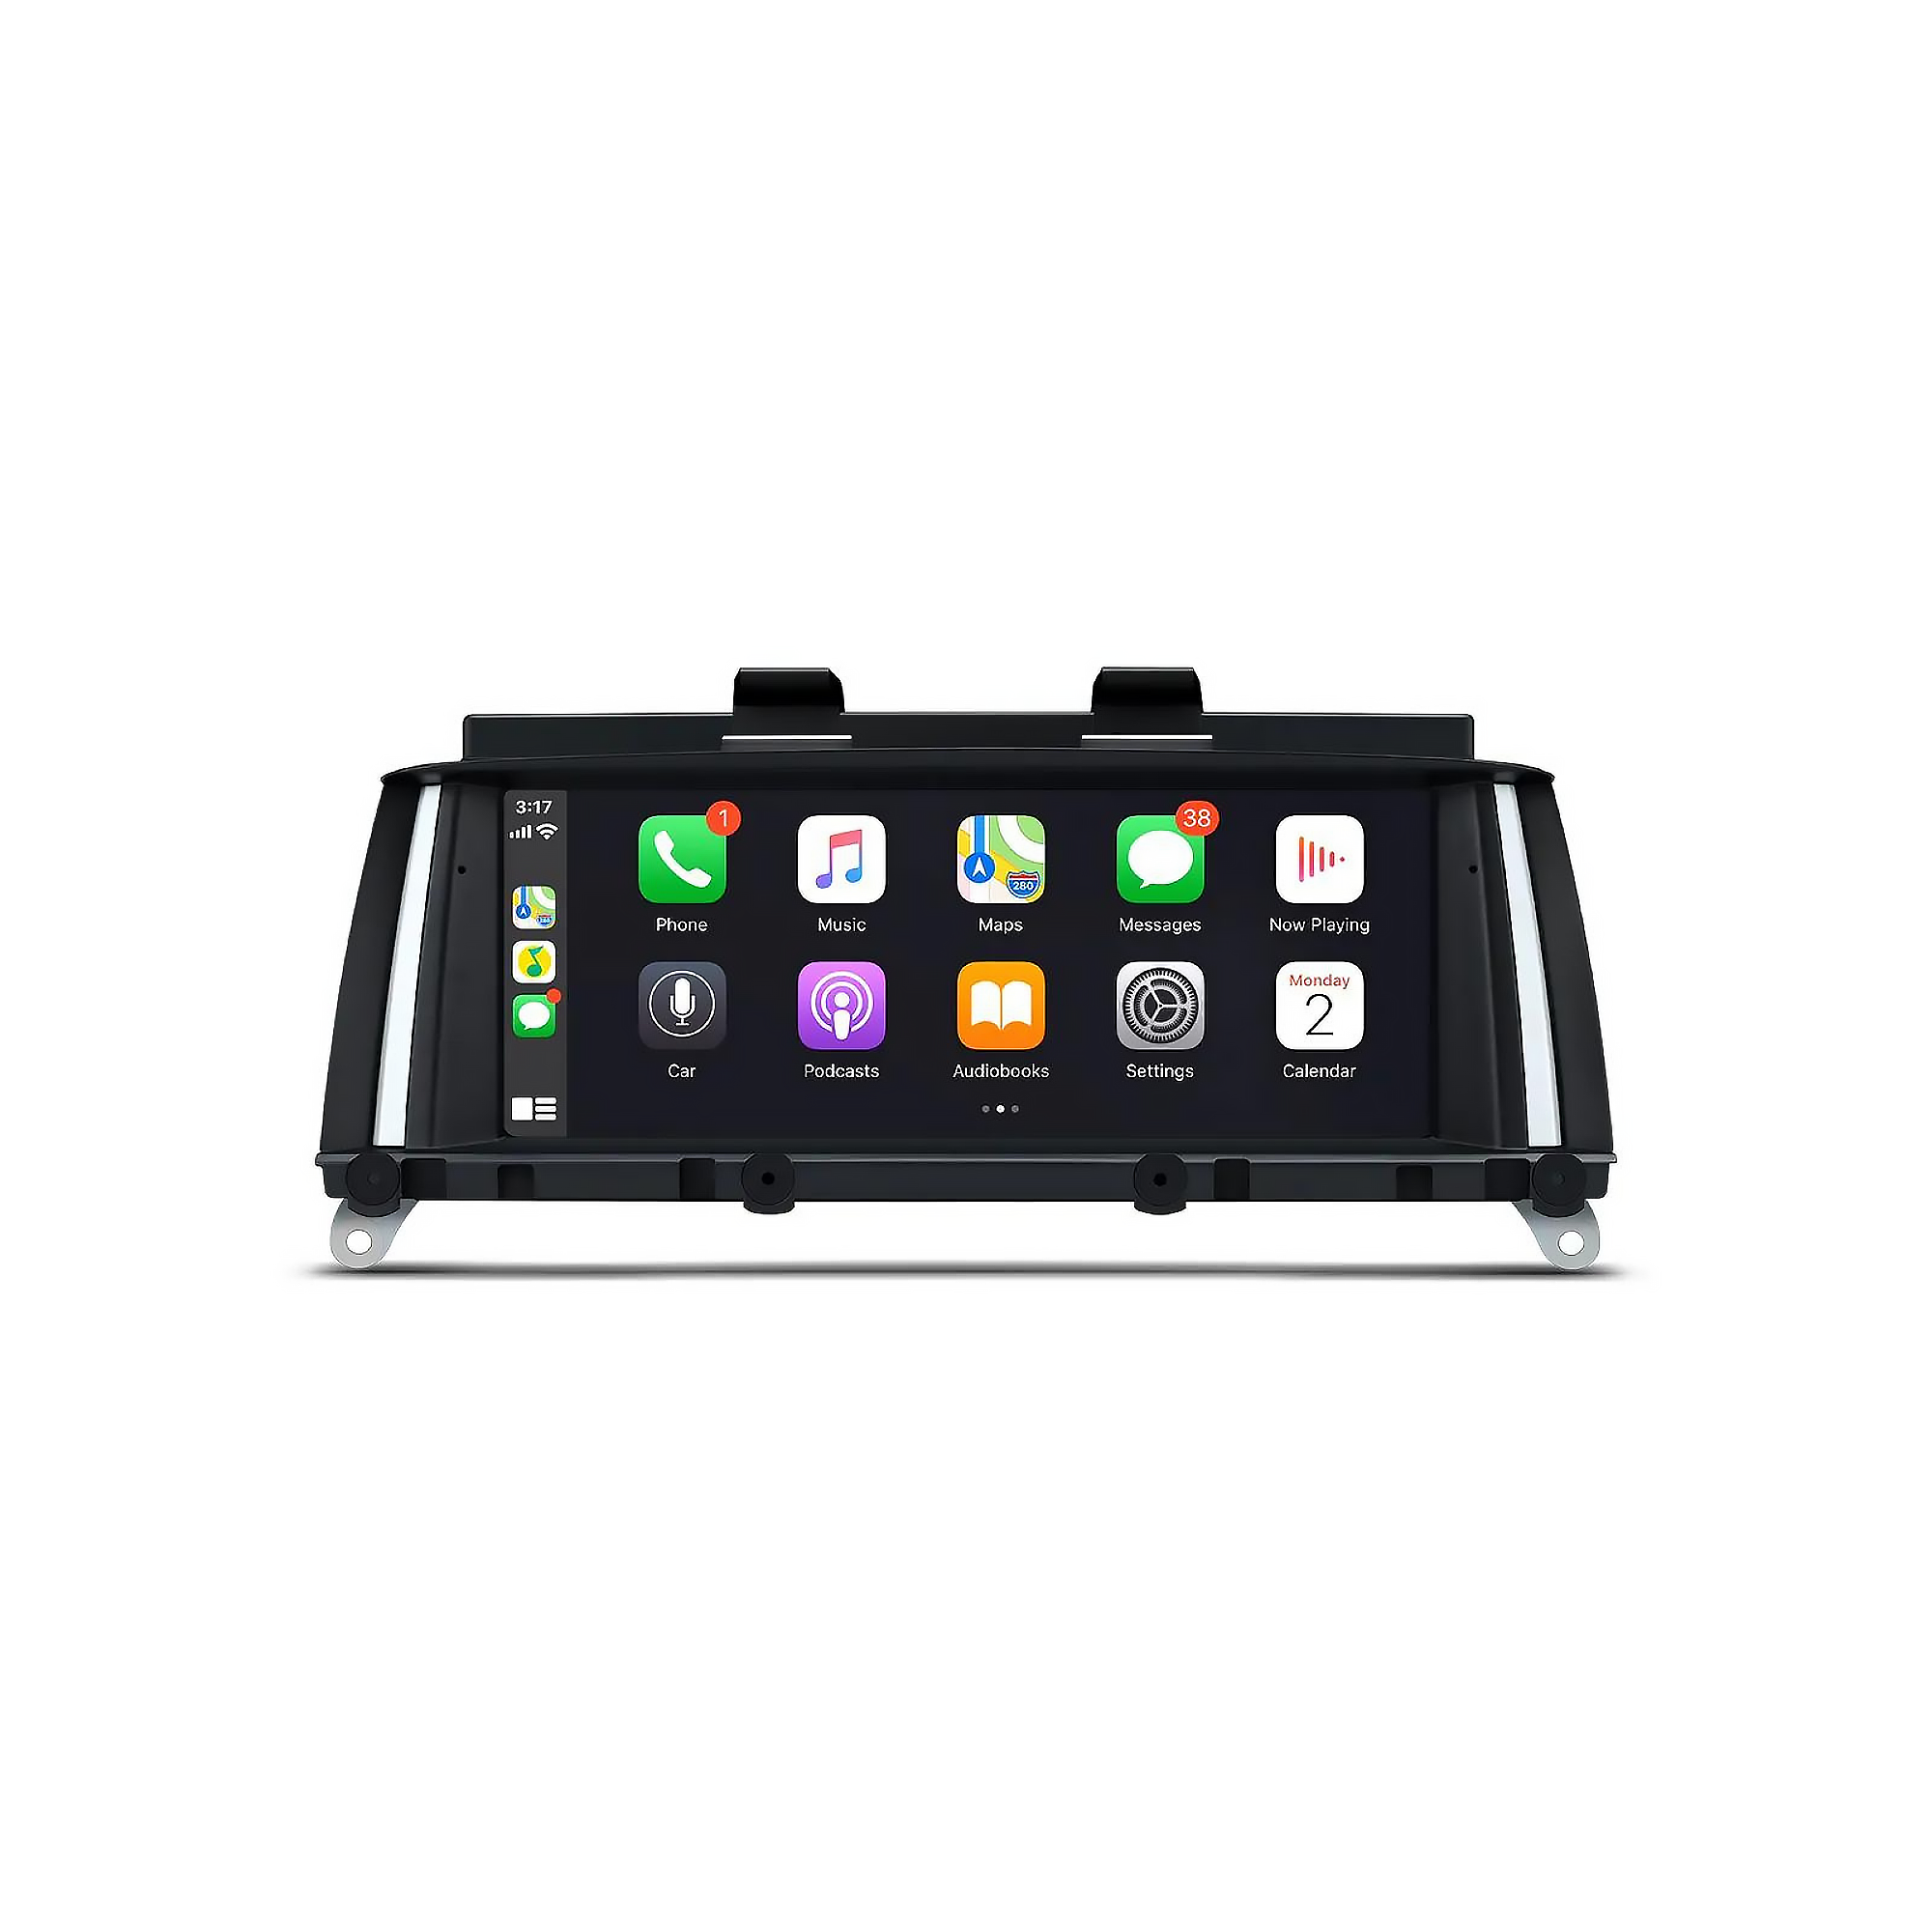 Direct fit for BMW X3 F25 (2010-2012 CIC), 8.8 Inch HD Android 12 Touchscreen display with built in Apple CarPlay & Android Auto